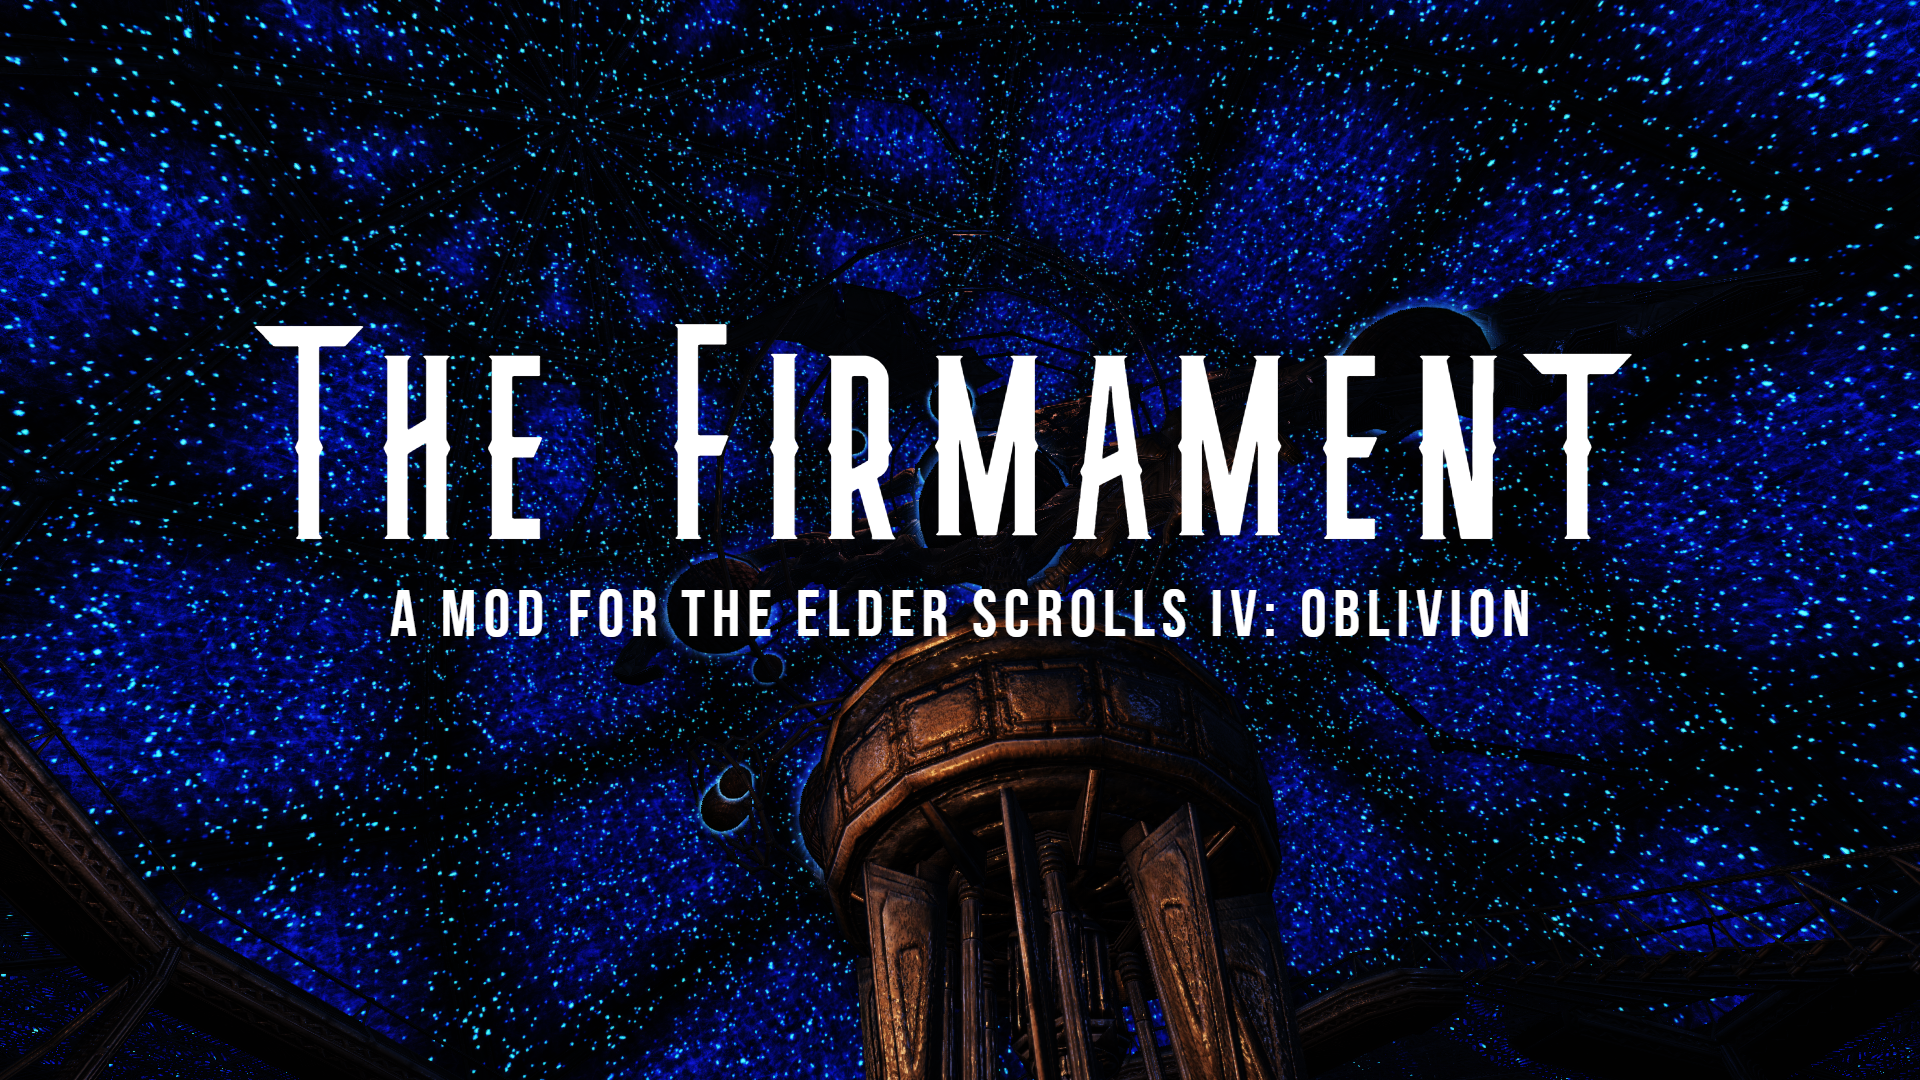 The Firmament Image